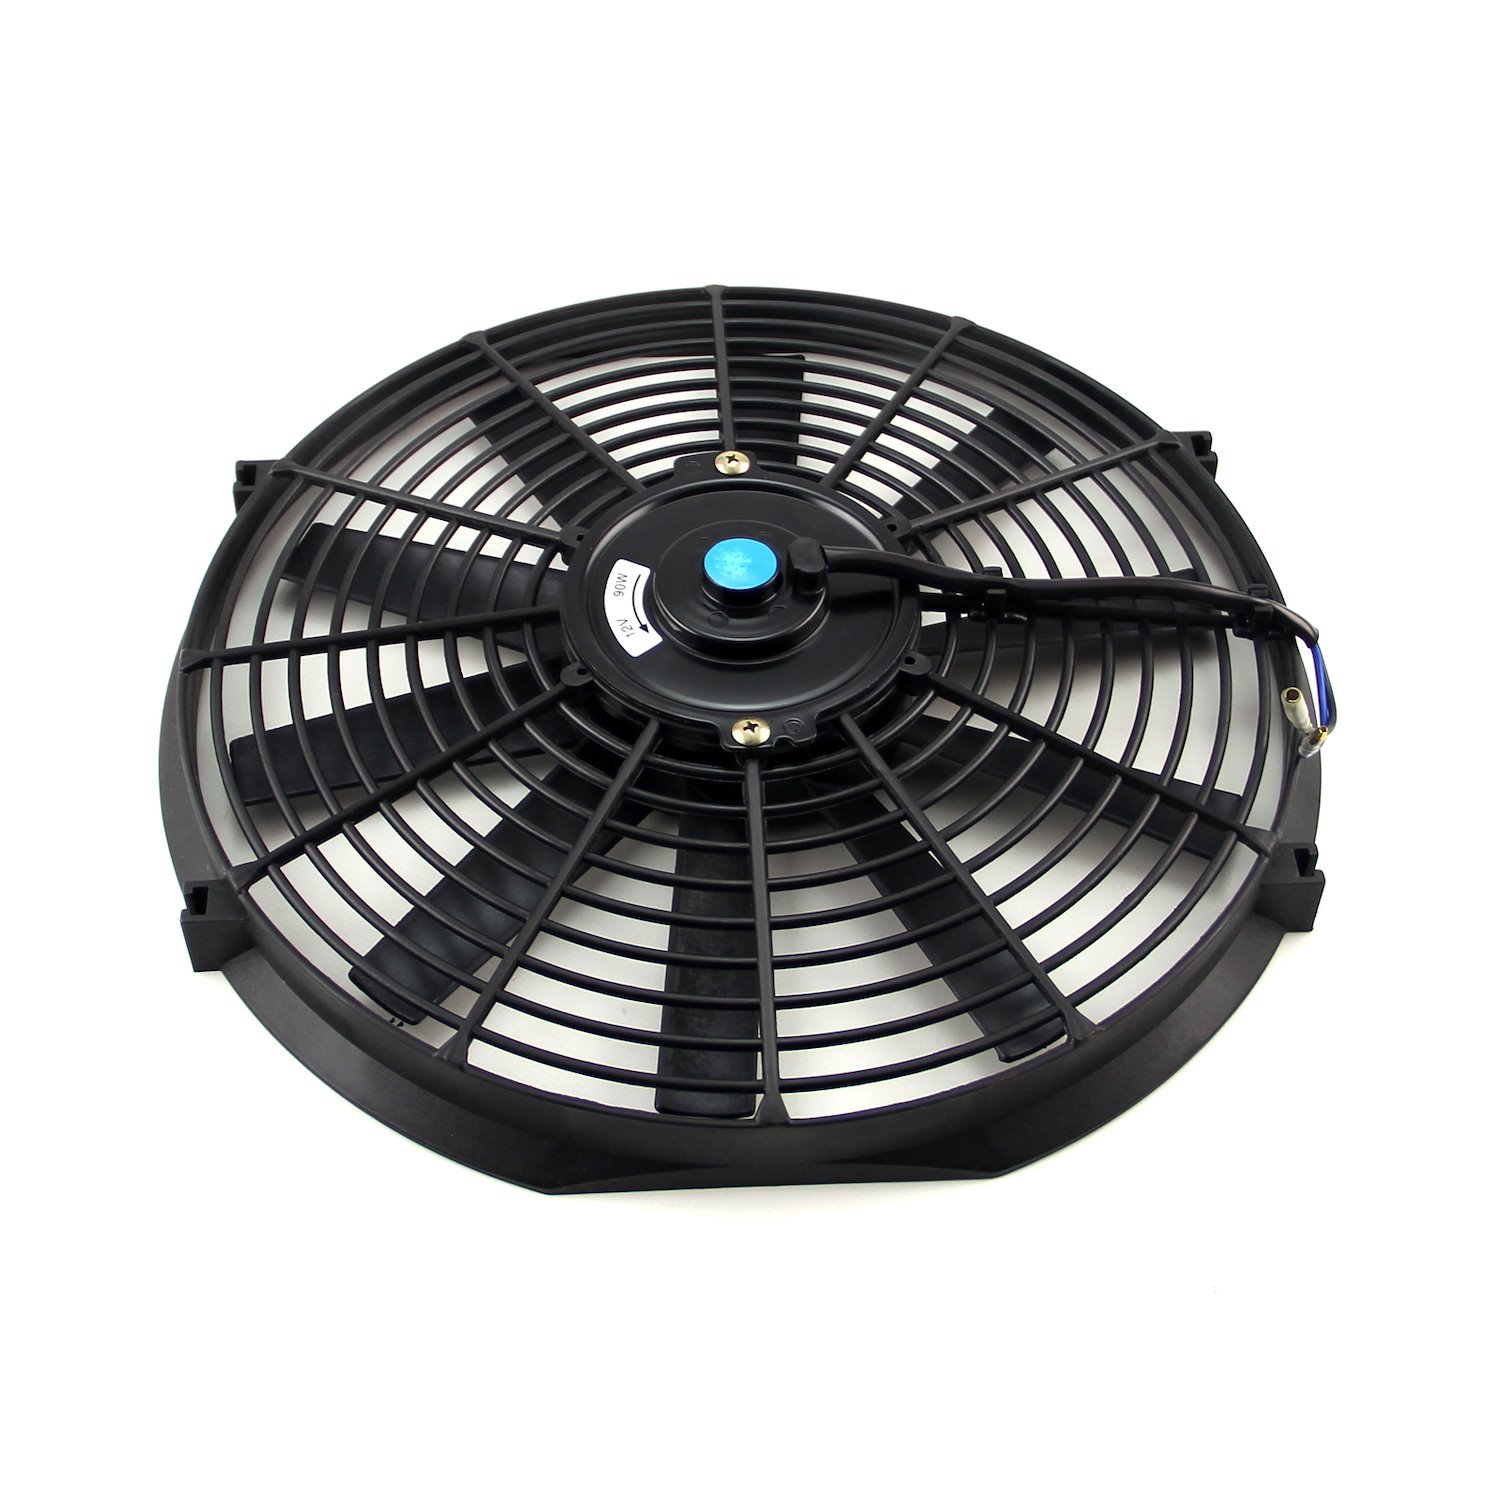 14" Straight Blade Electric Fan Height: 14.5"